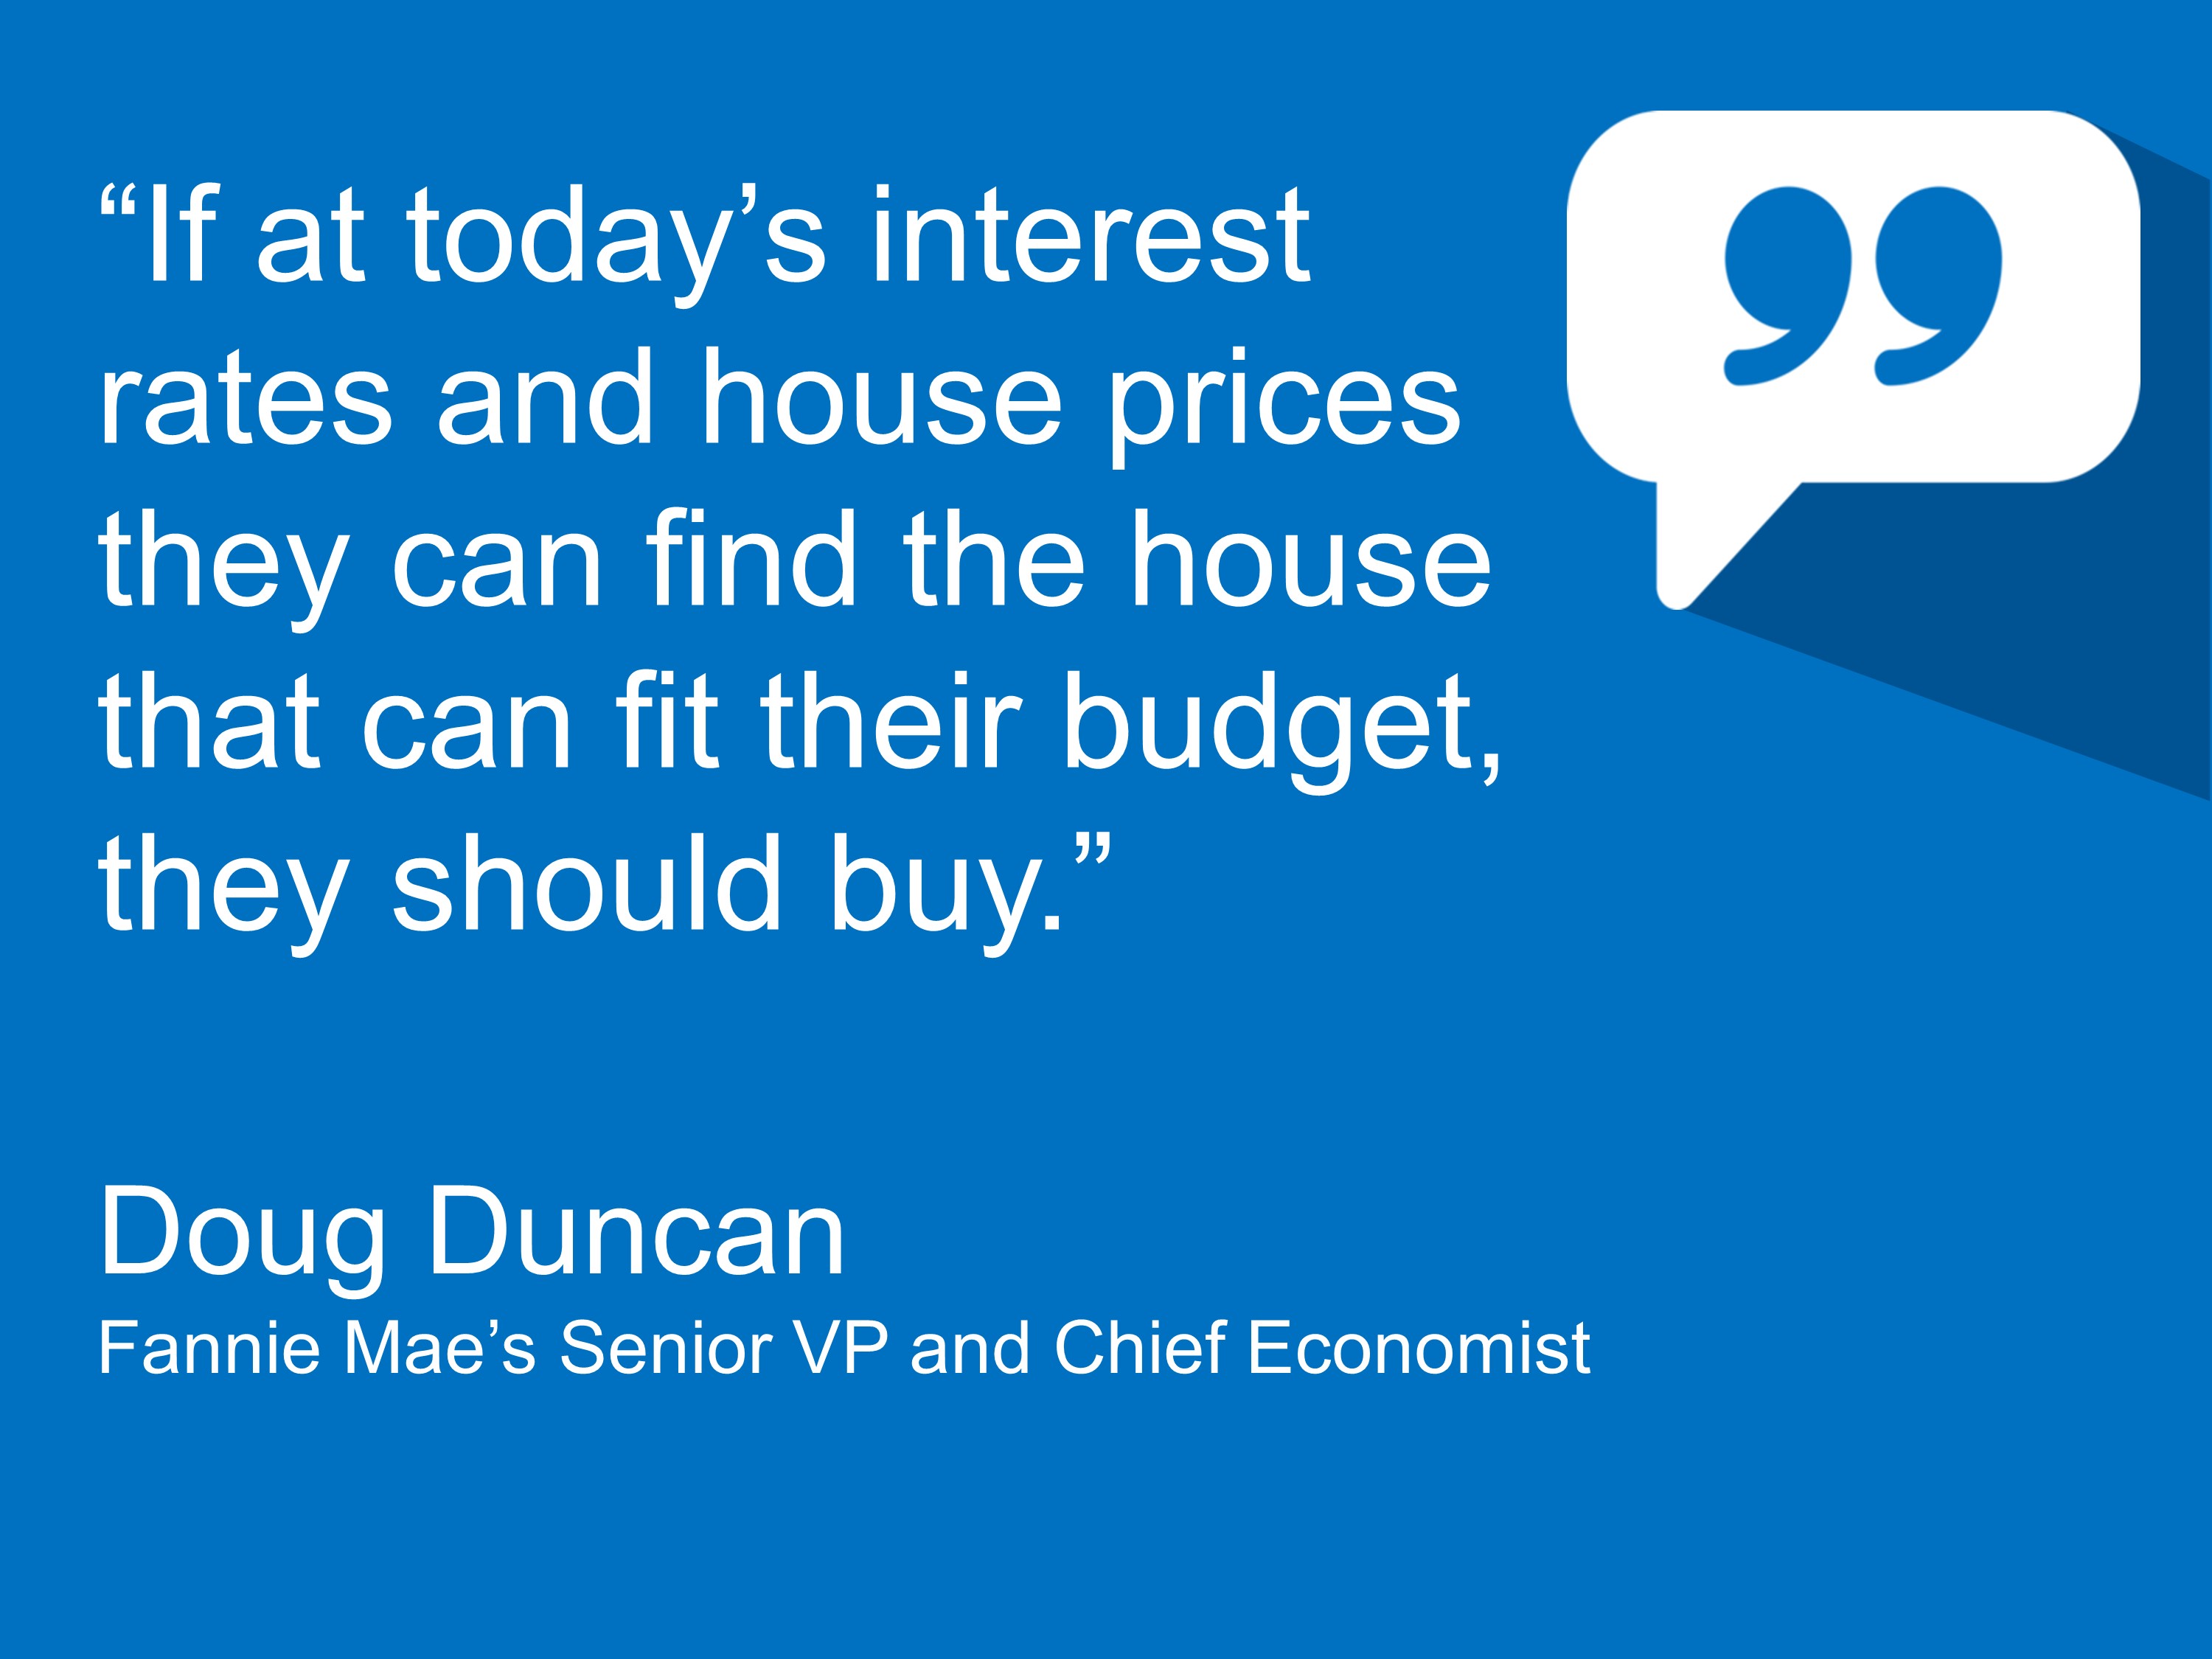 chief economist says you should buy a home if you ccan